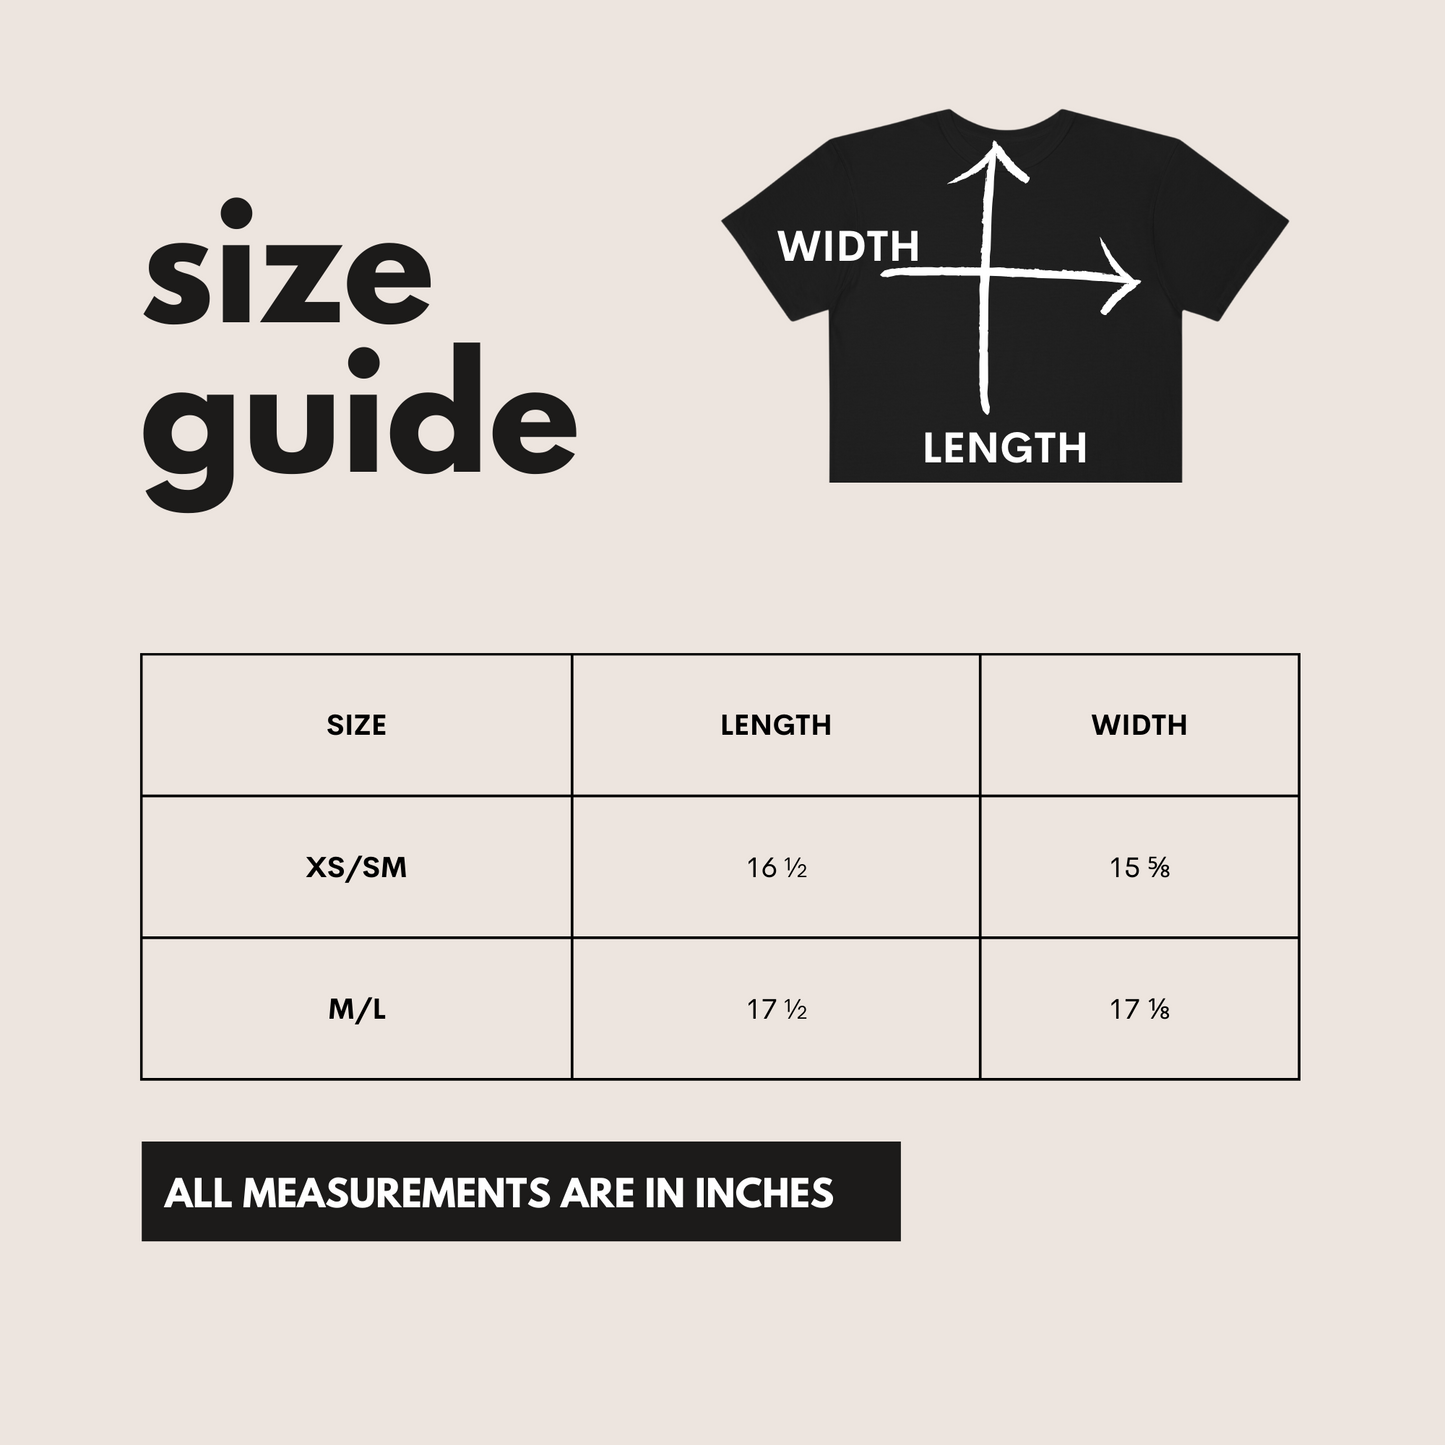 a t - shirt size guide for men and women